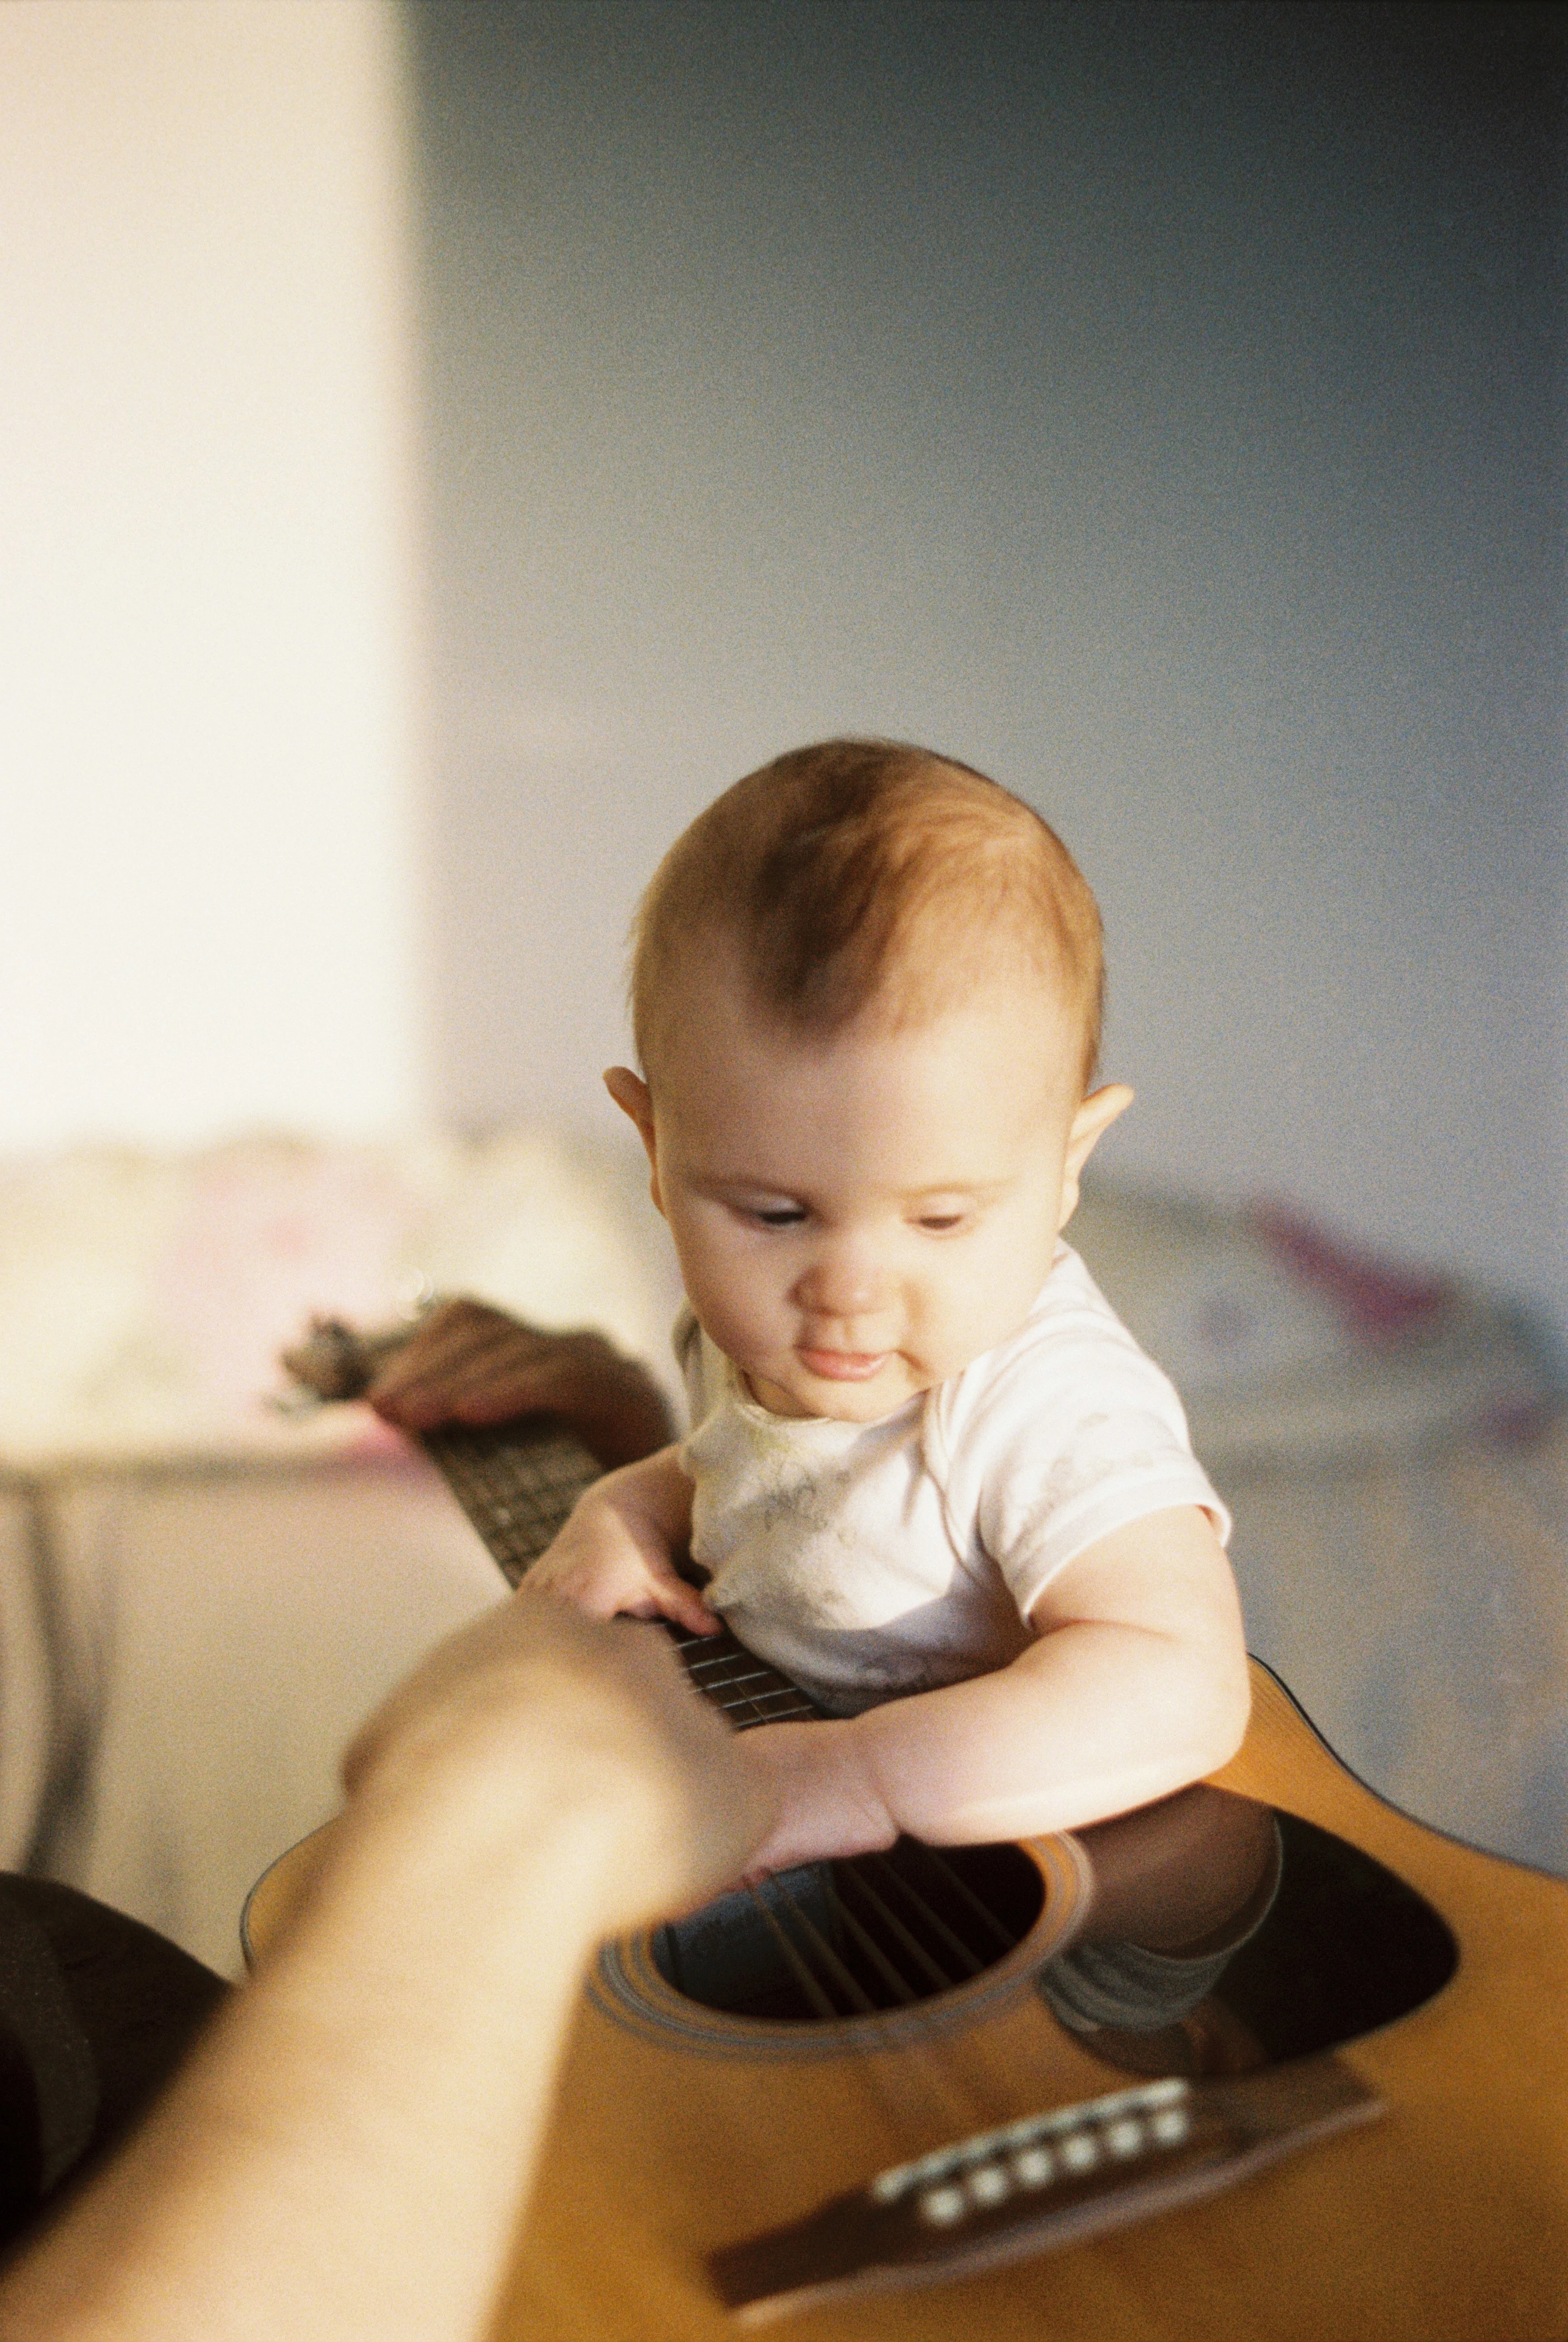 Baby holding a Guitar